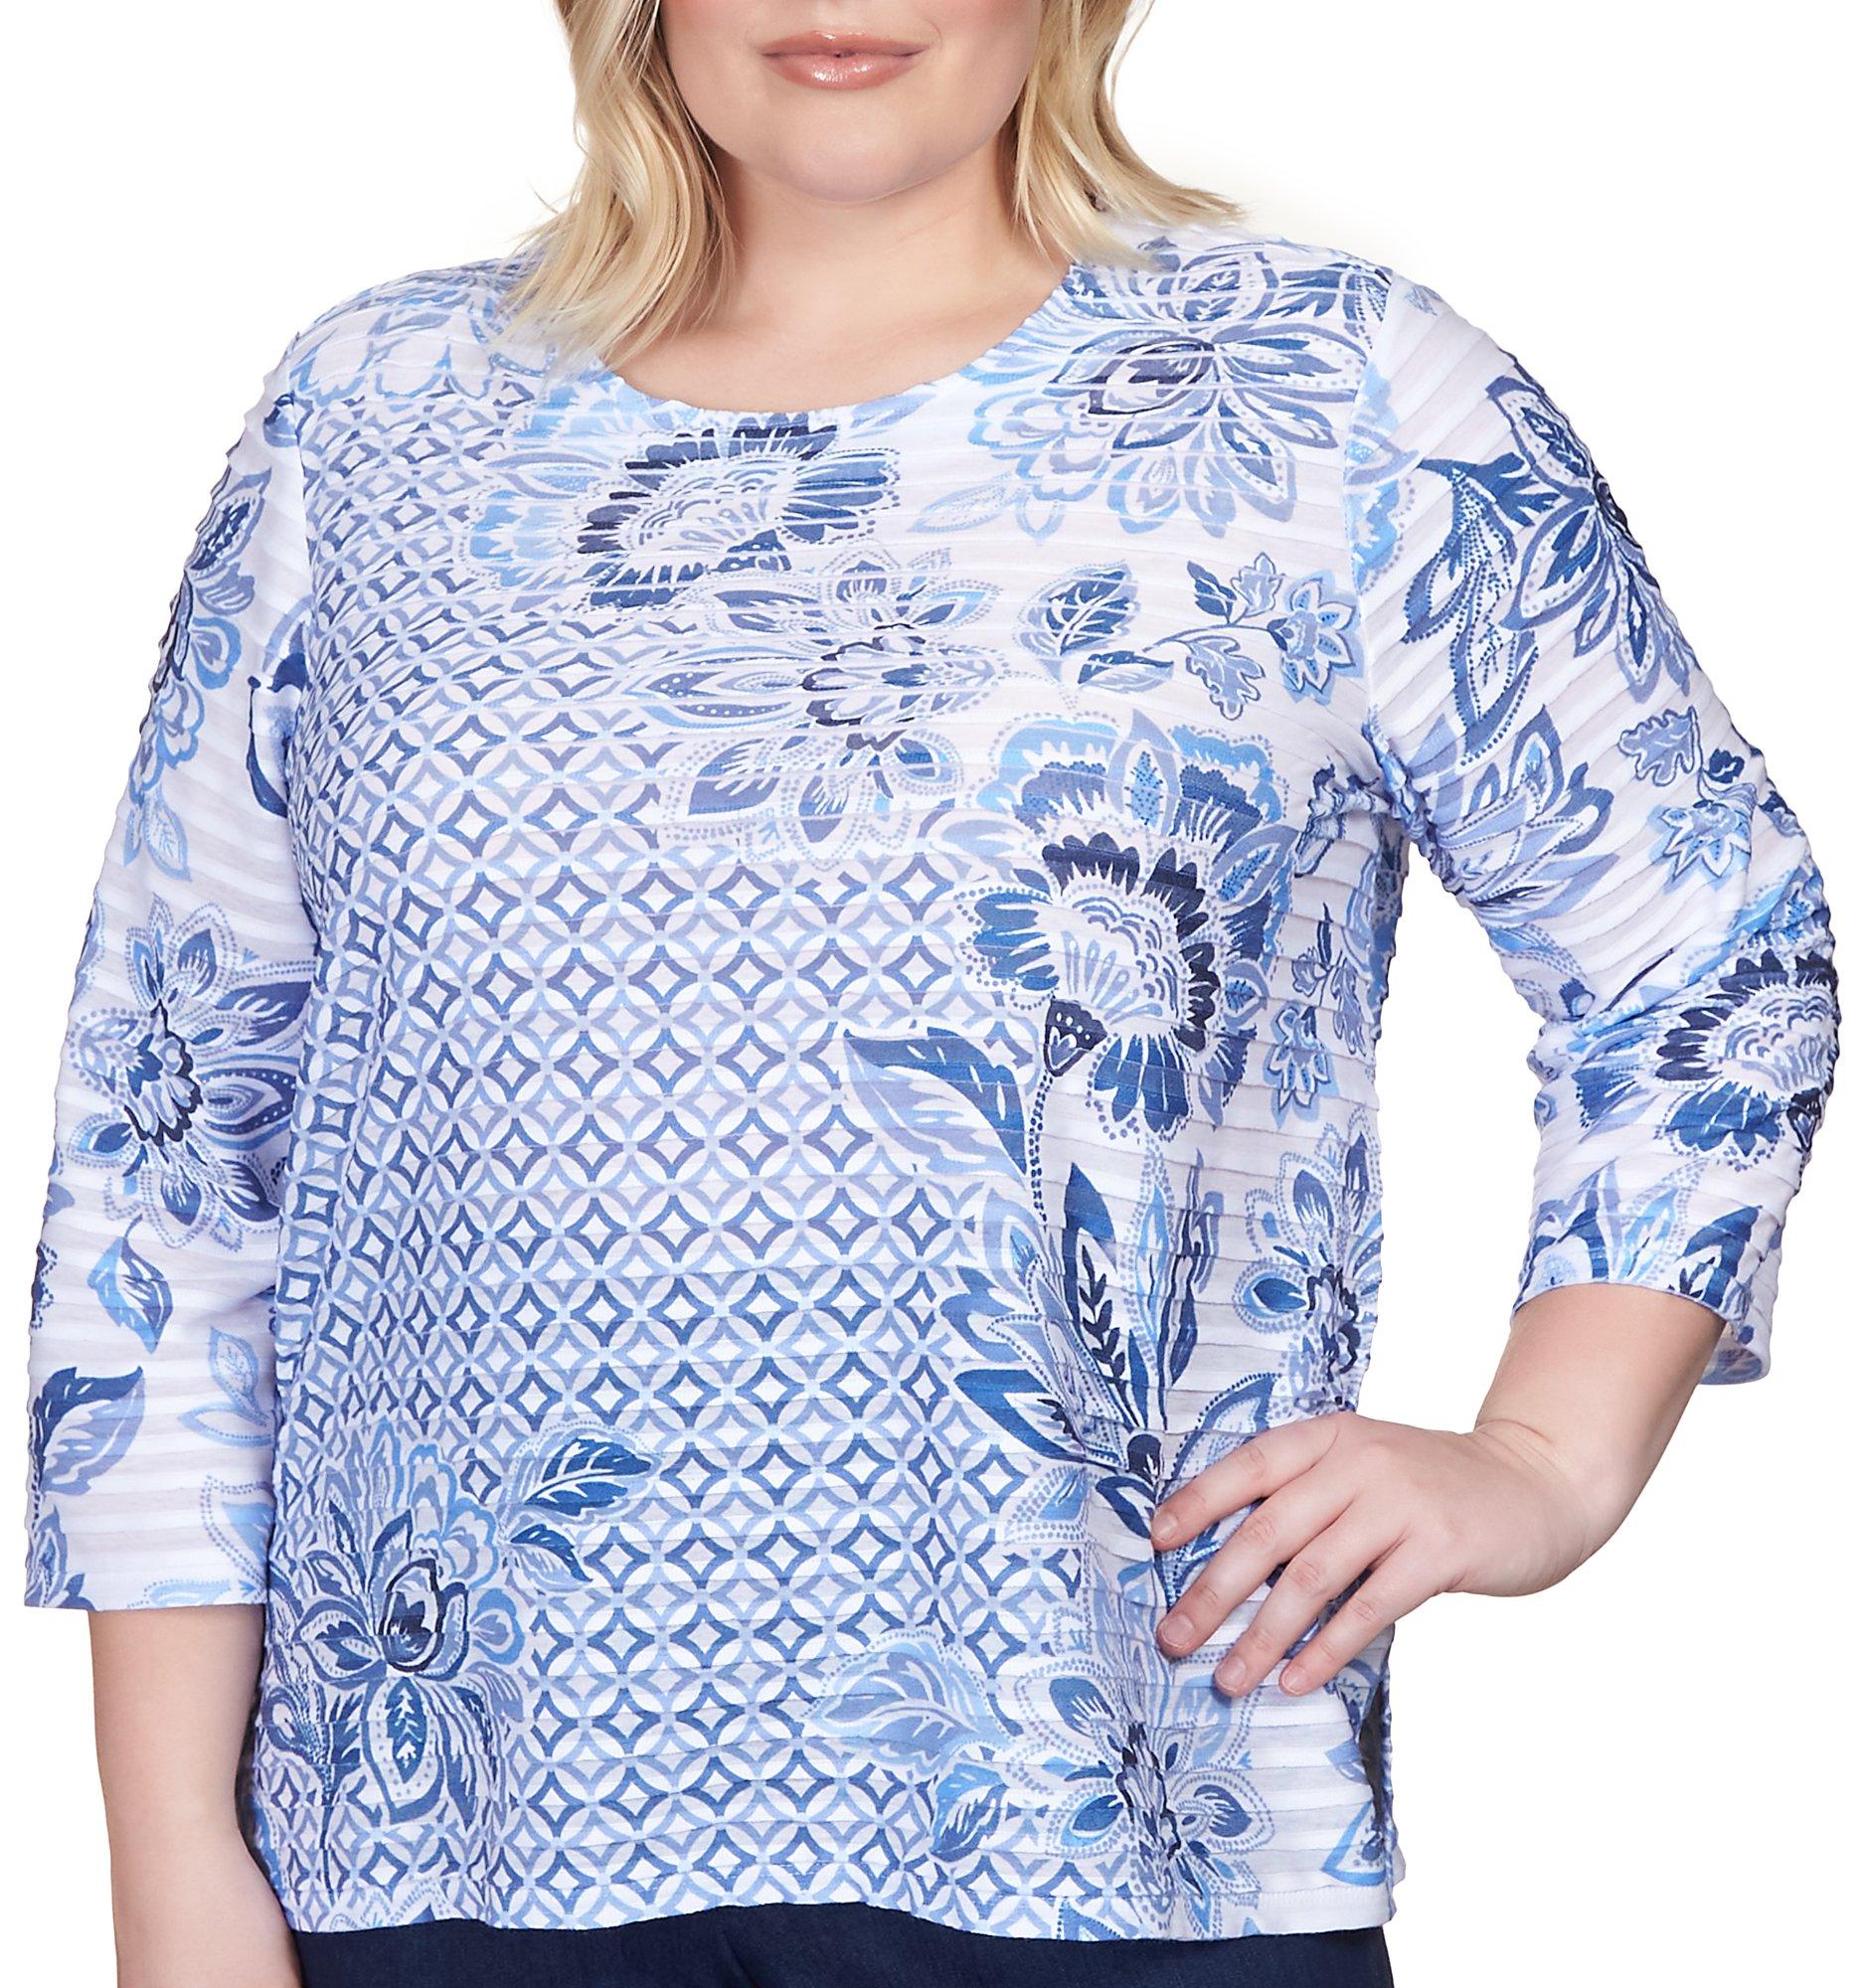 Alfred Dunner Plus Geo Floral Ruffle 3/4 Sleeve Top